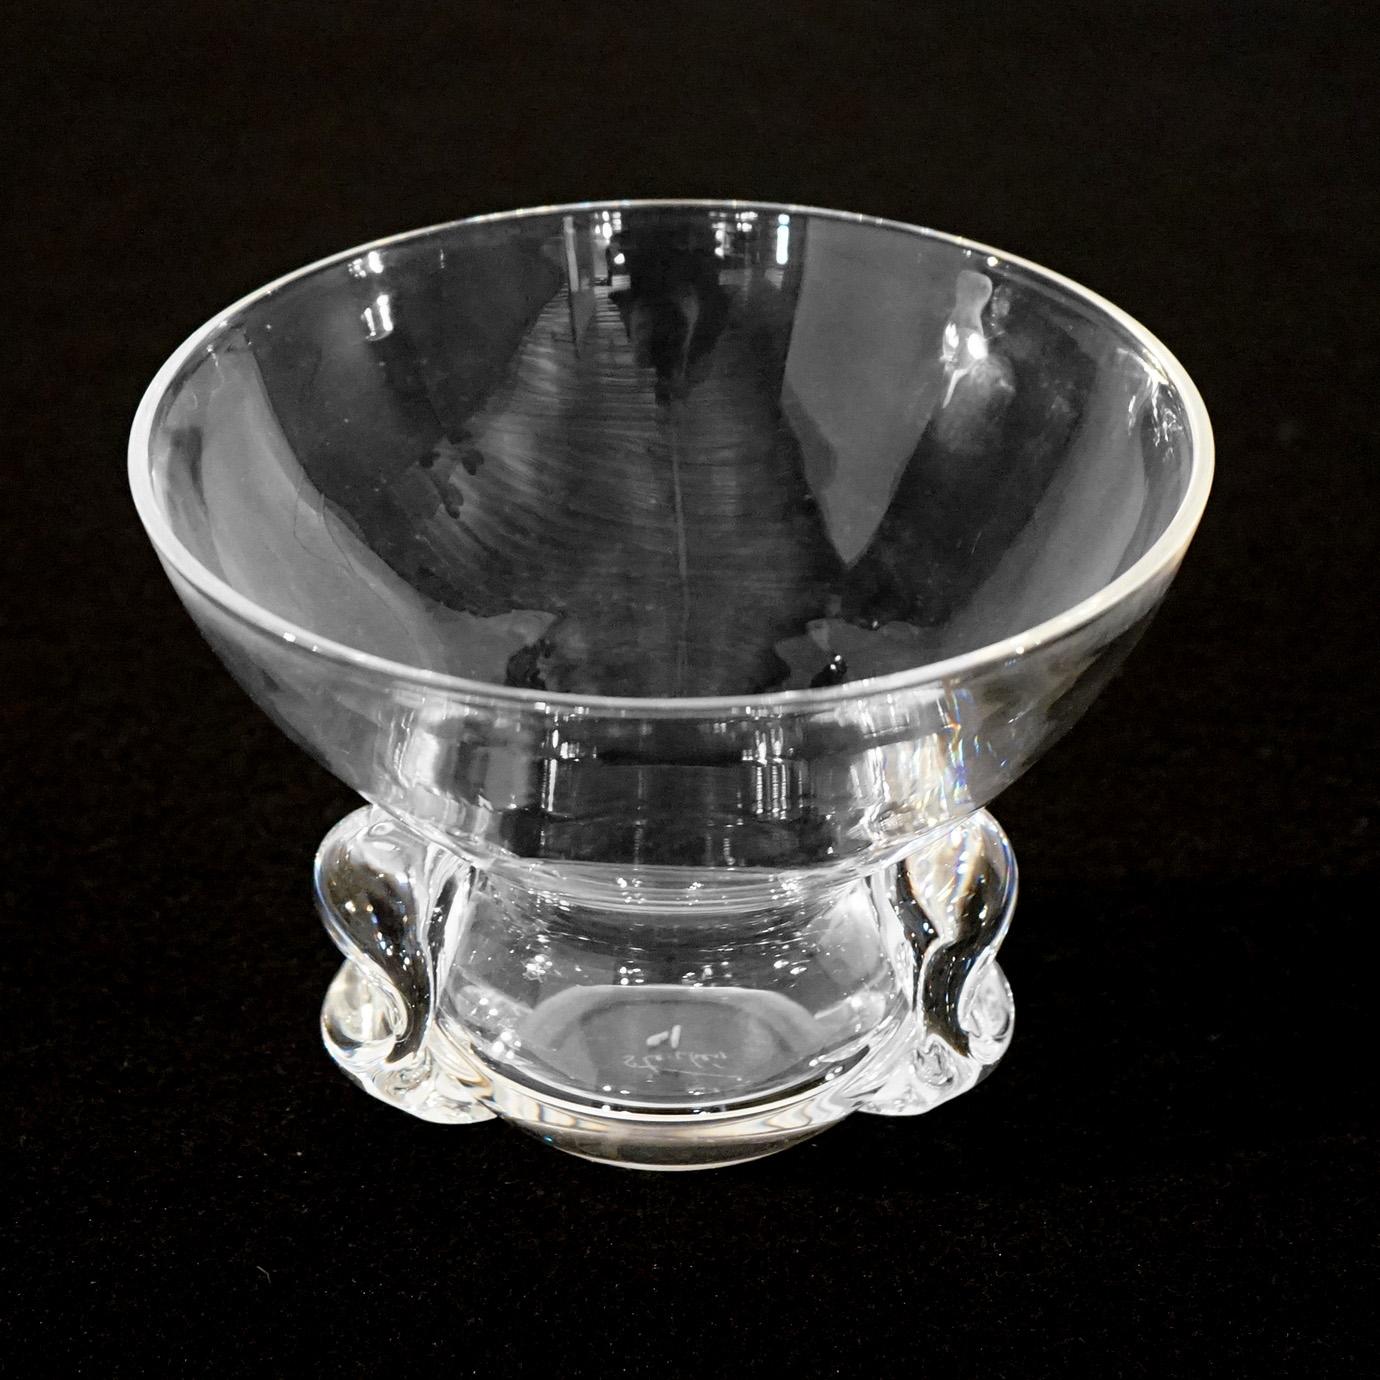 Mid Century Modern Steuben Art Glass Crystal Bowl with Pinched Base, Signed, 20thC

Measures - 5